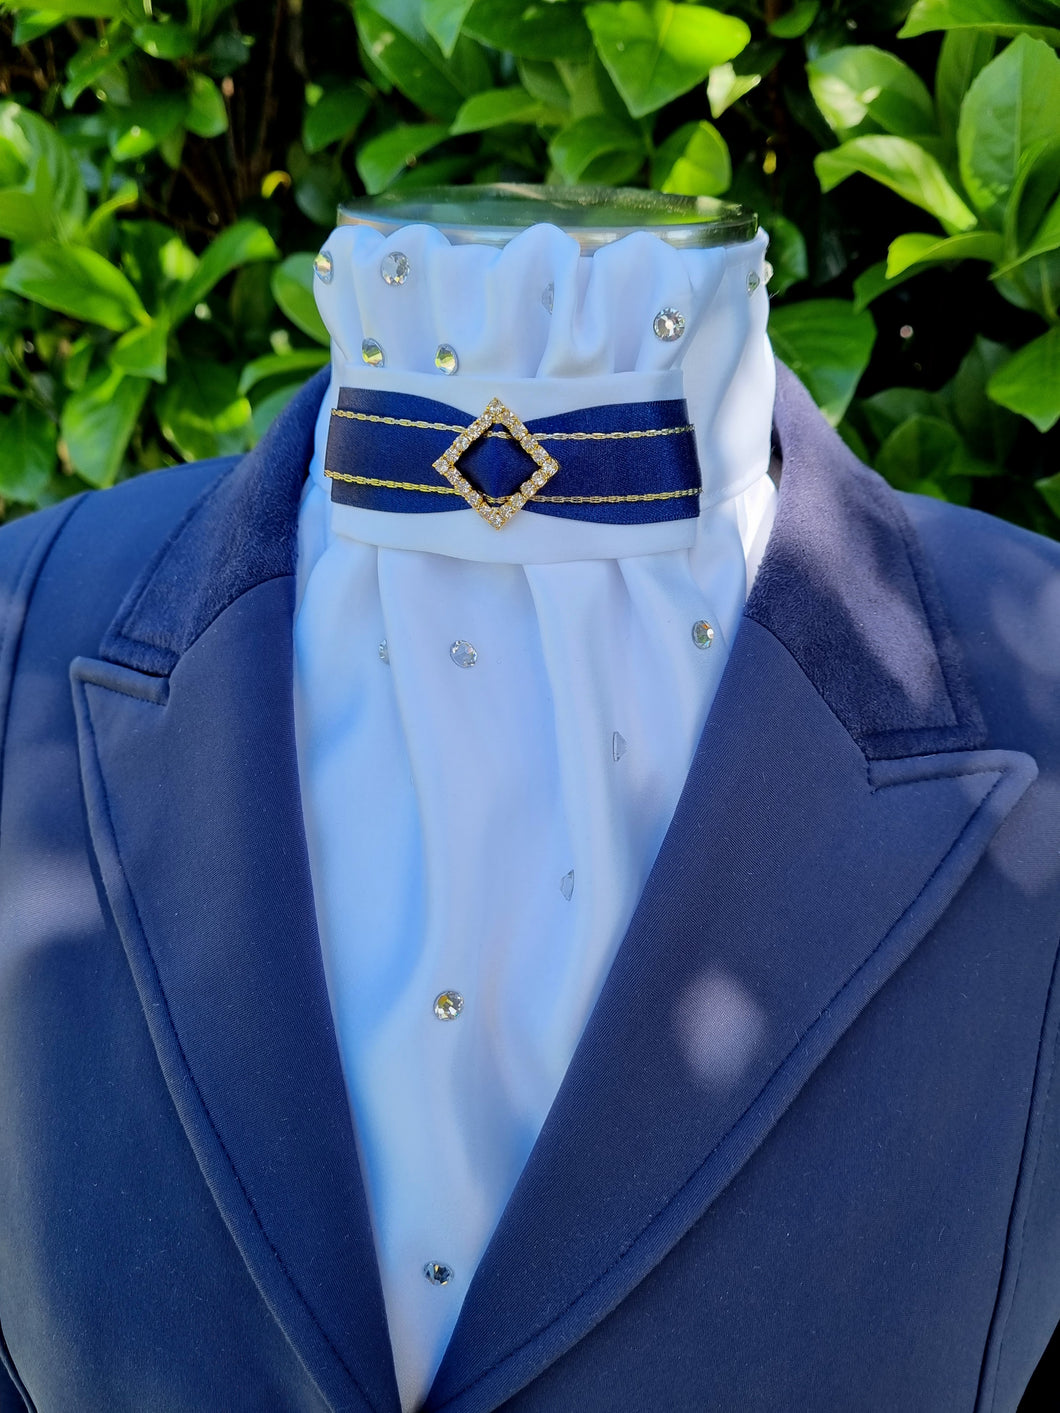 ERA EURO AMORE' STOCK TIE – White satin, navy & gold trim with gold crystal diamond and scattered crystals